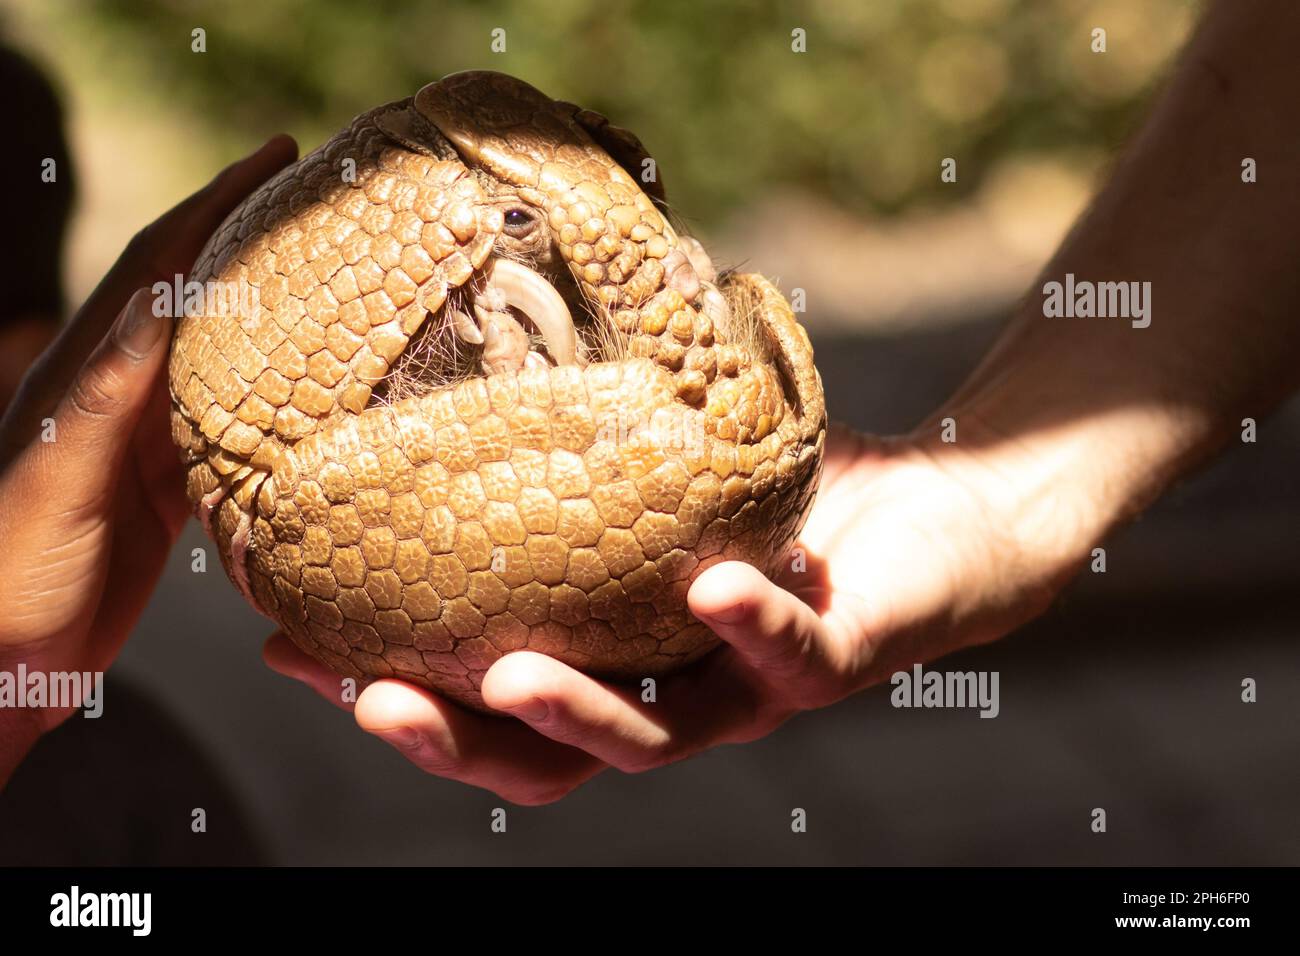 Curled armadillo being stroked Stock Photo